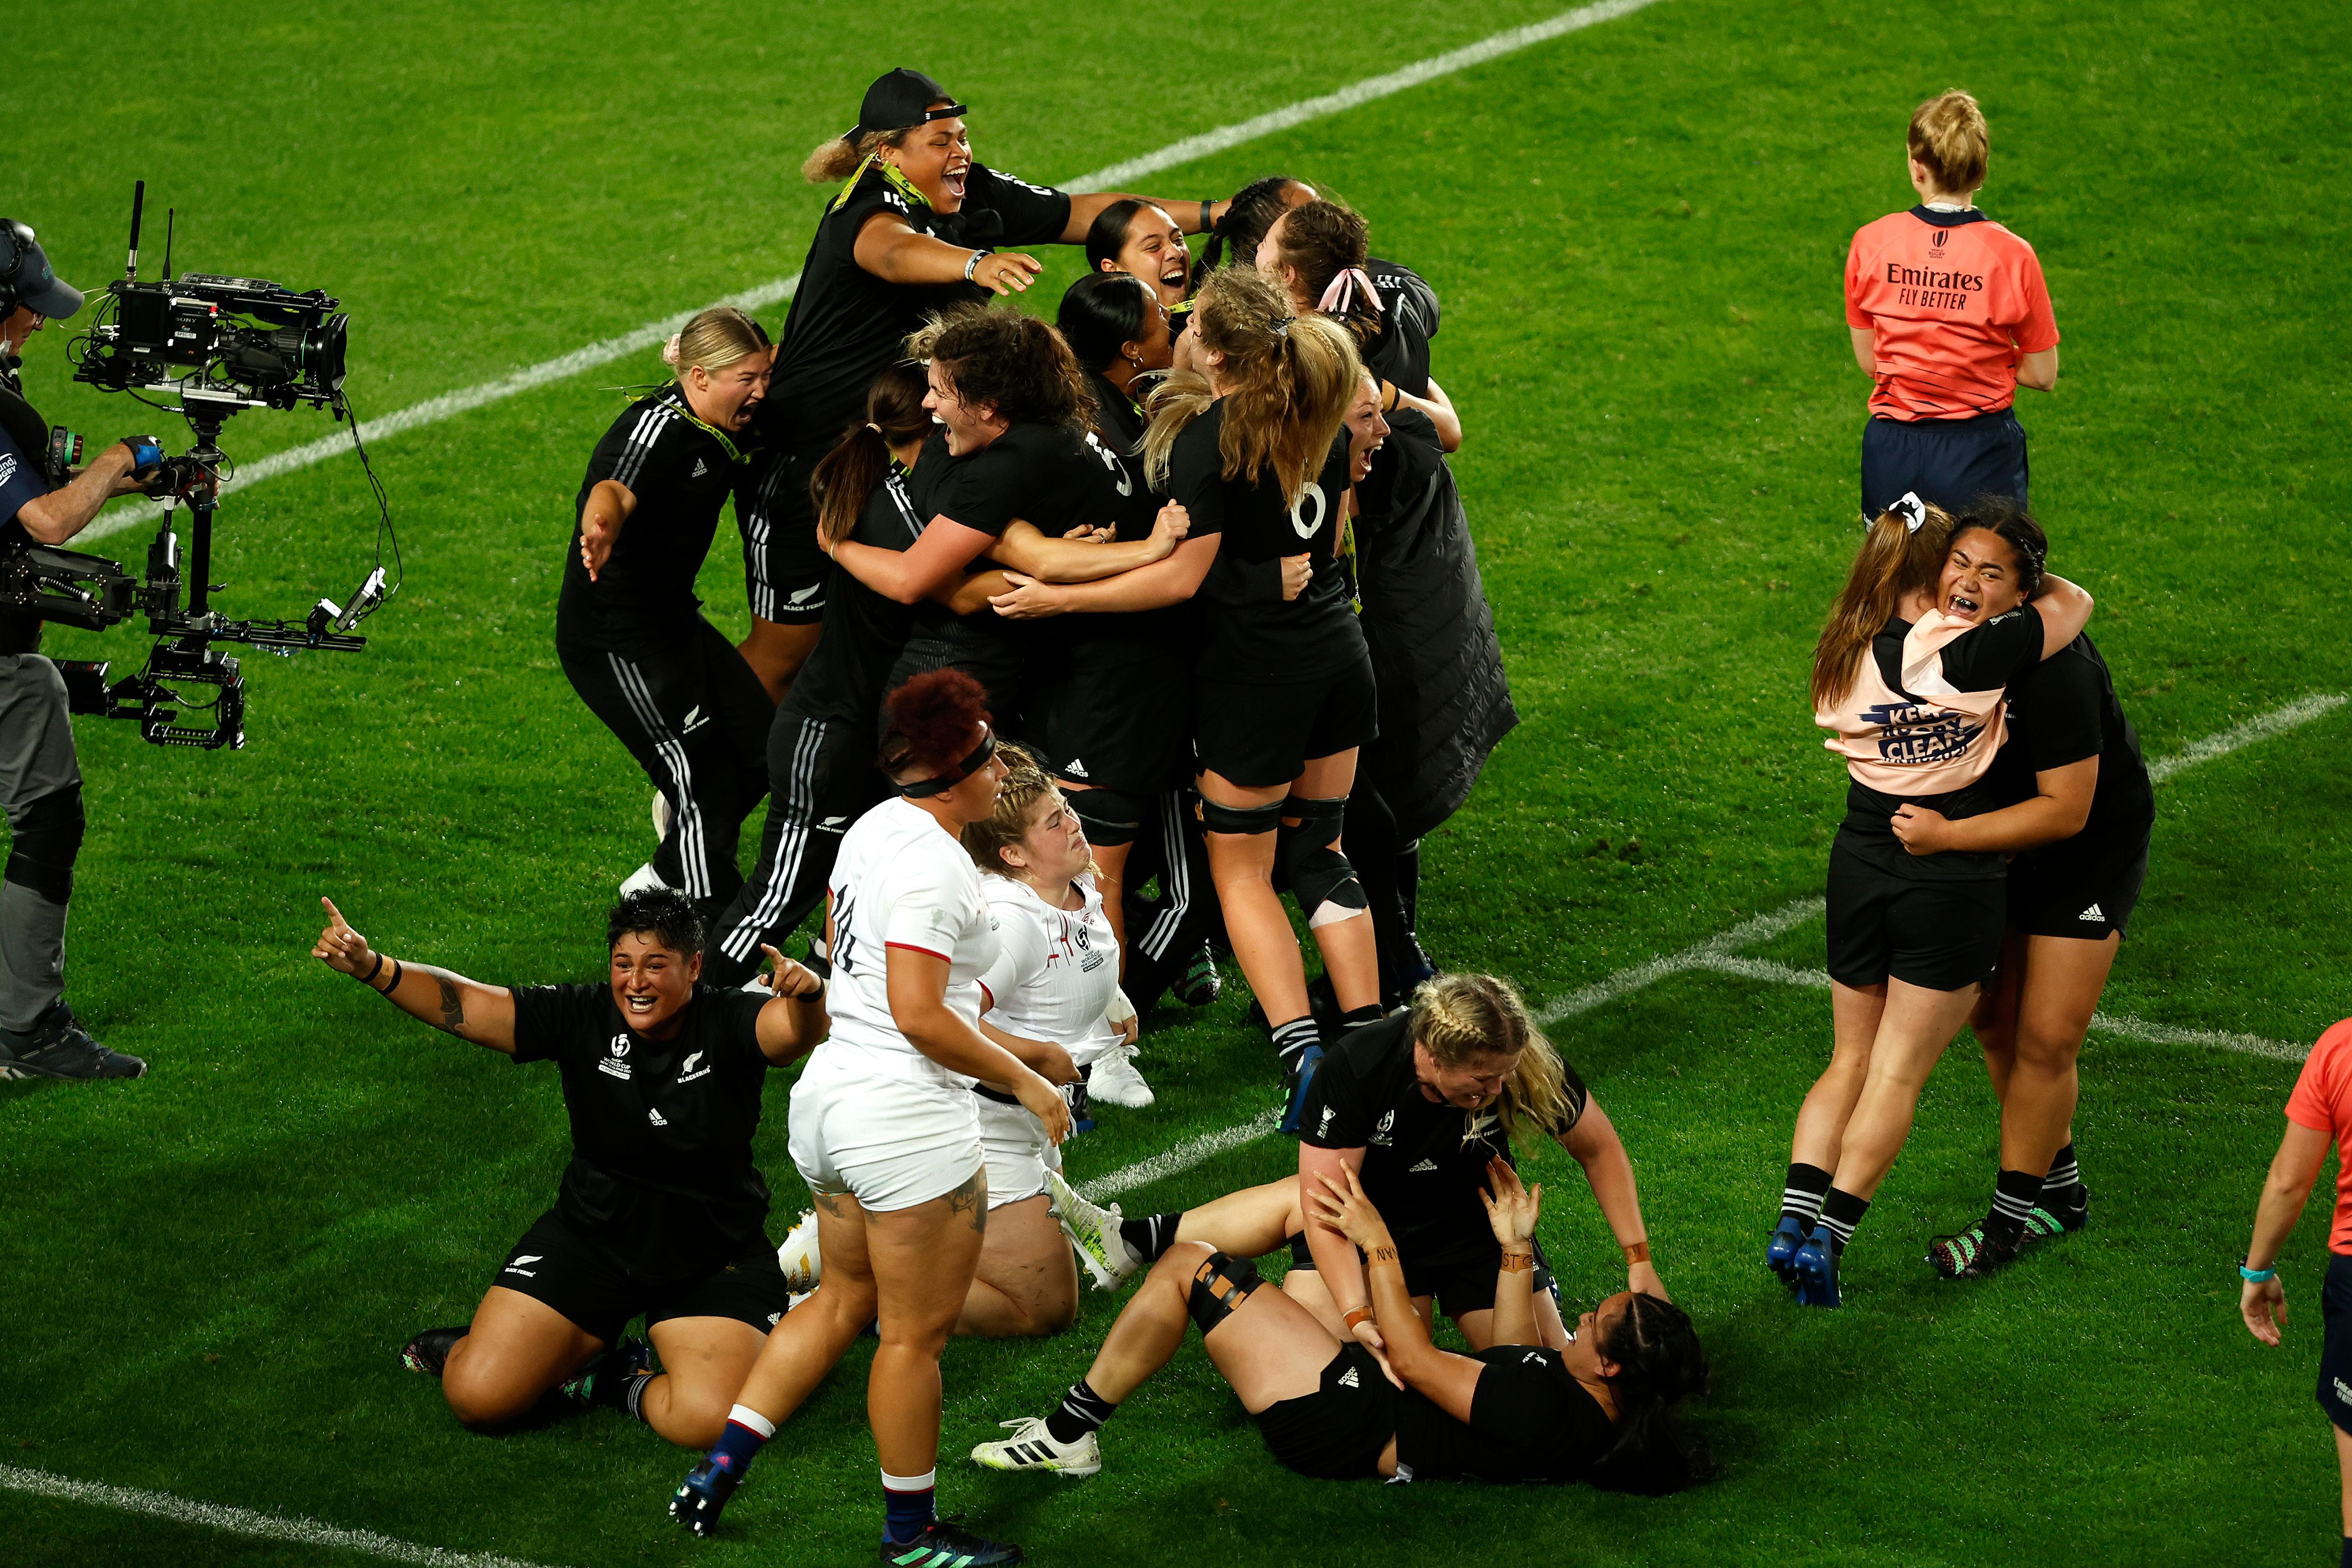 New Zealand celebrate winning the Rugby World Cup